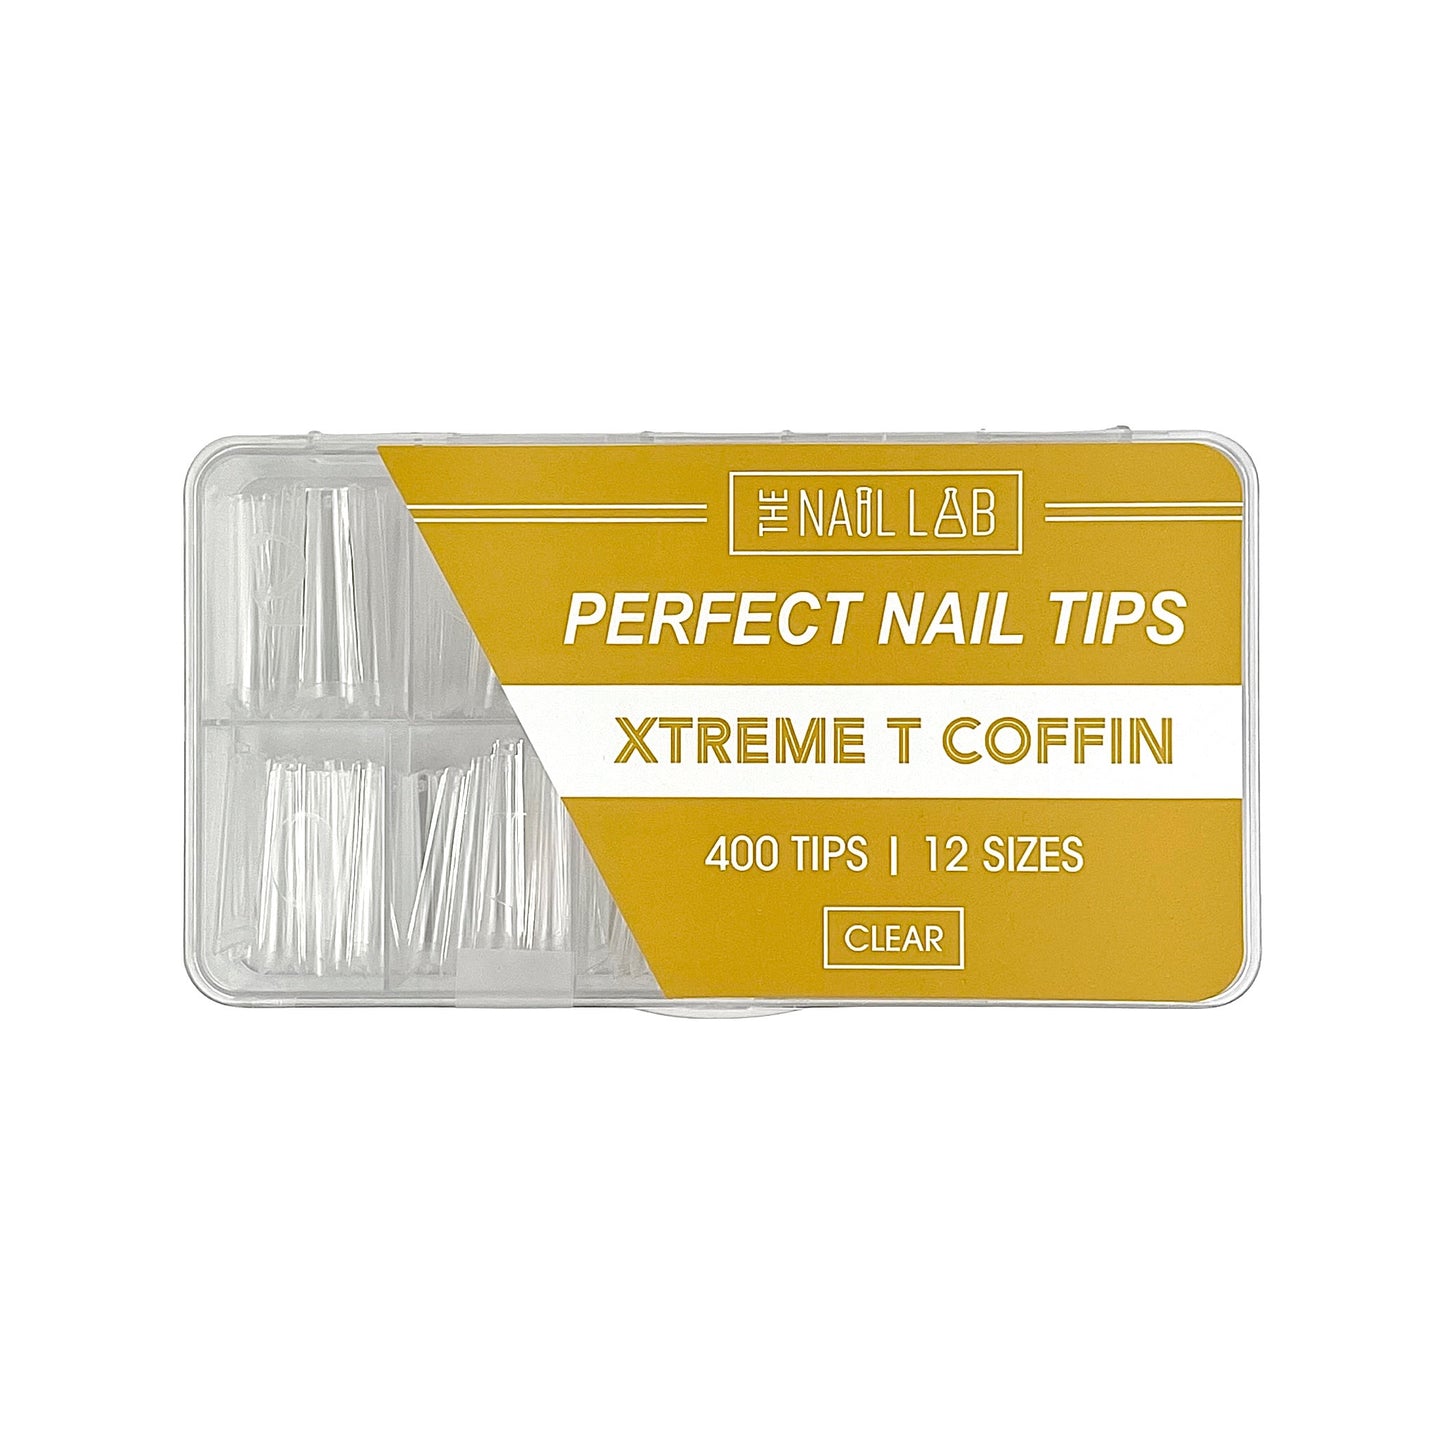 
                  
                    XTREME T COFFIN PERFECT NAIL TIPS
                  
                